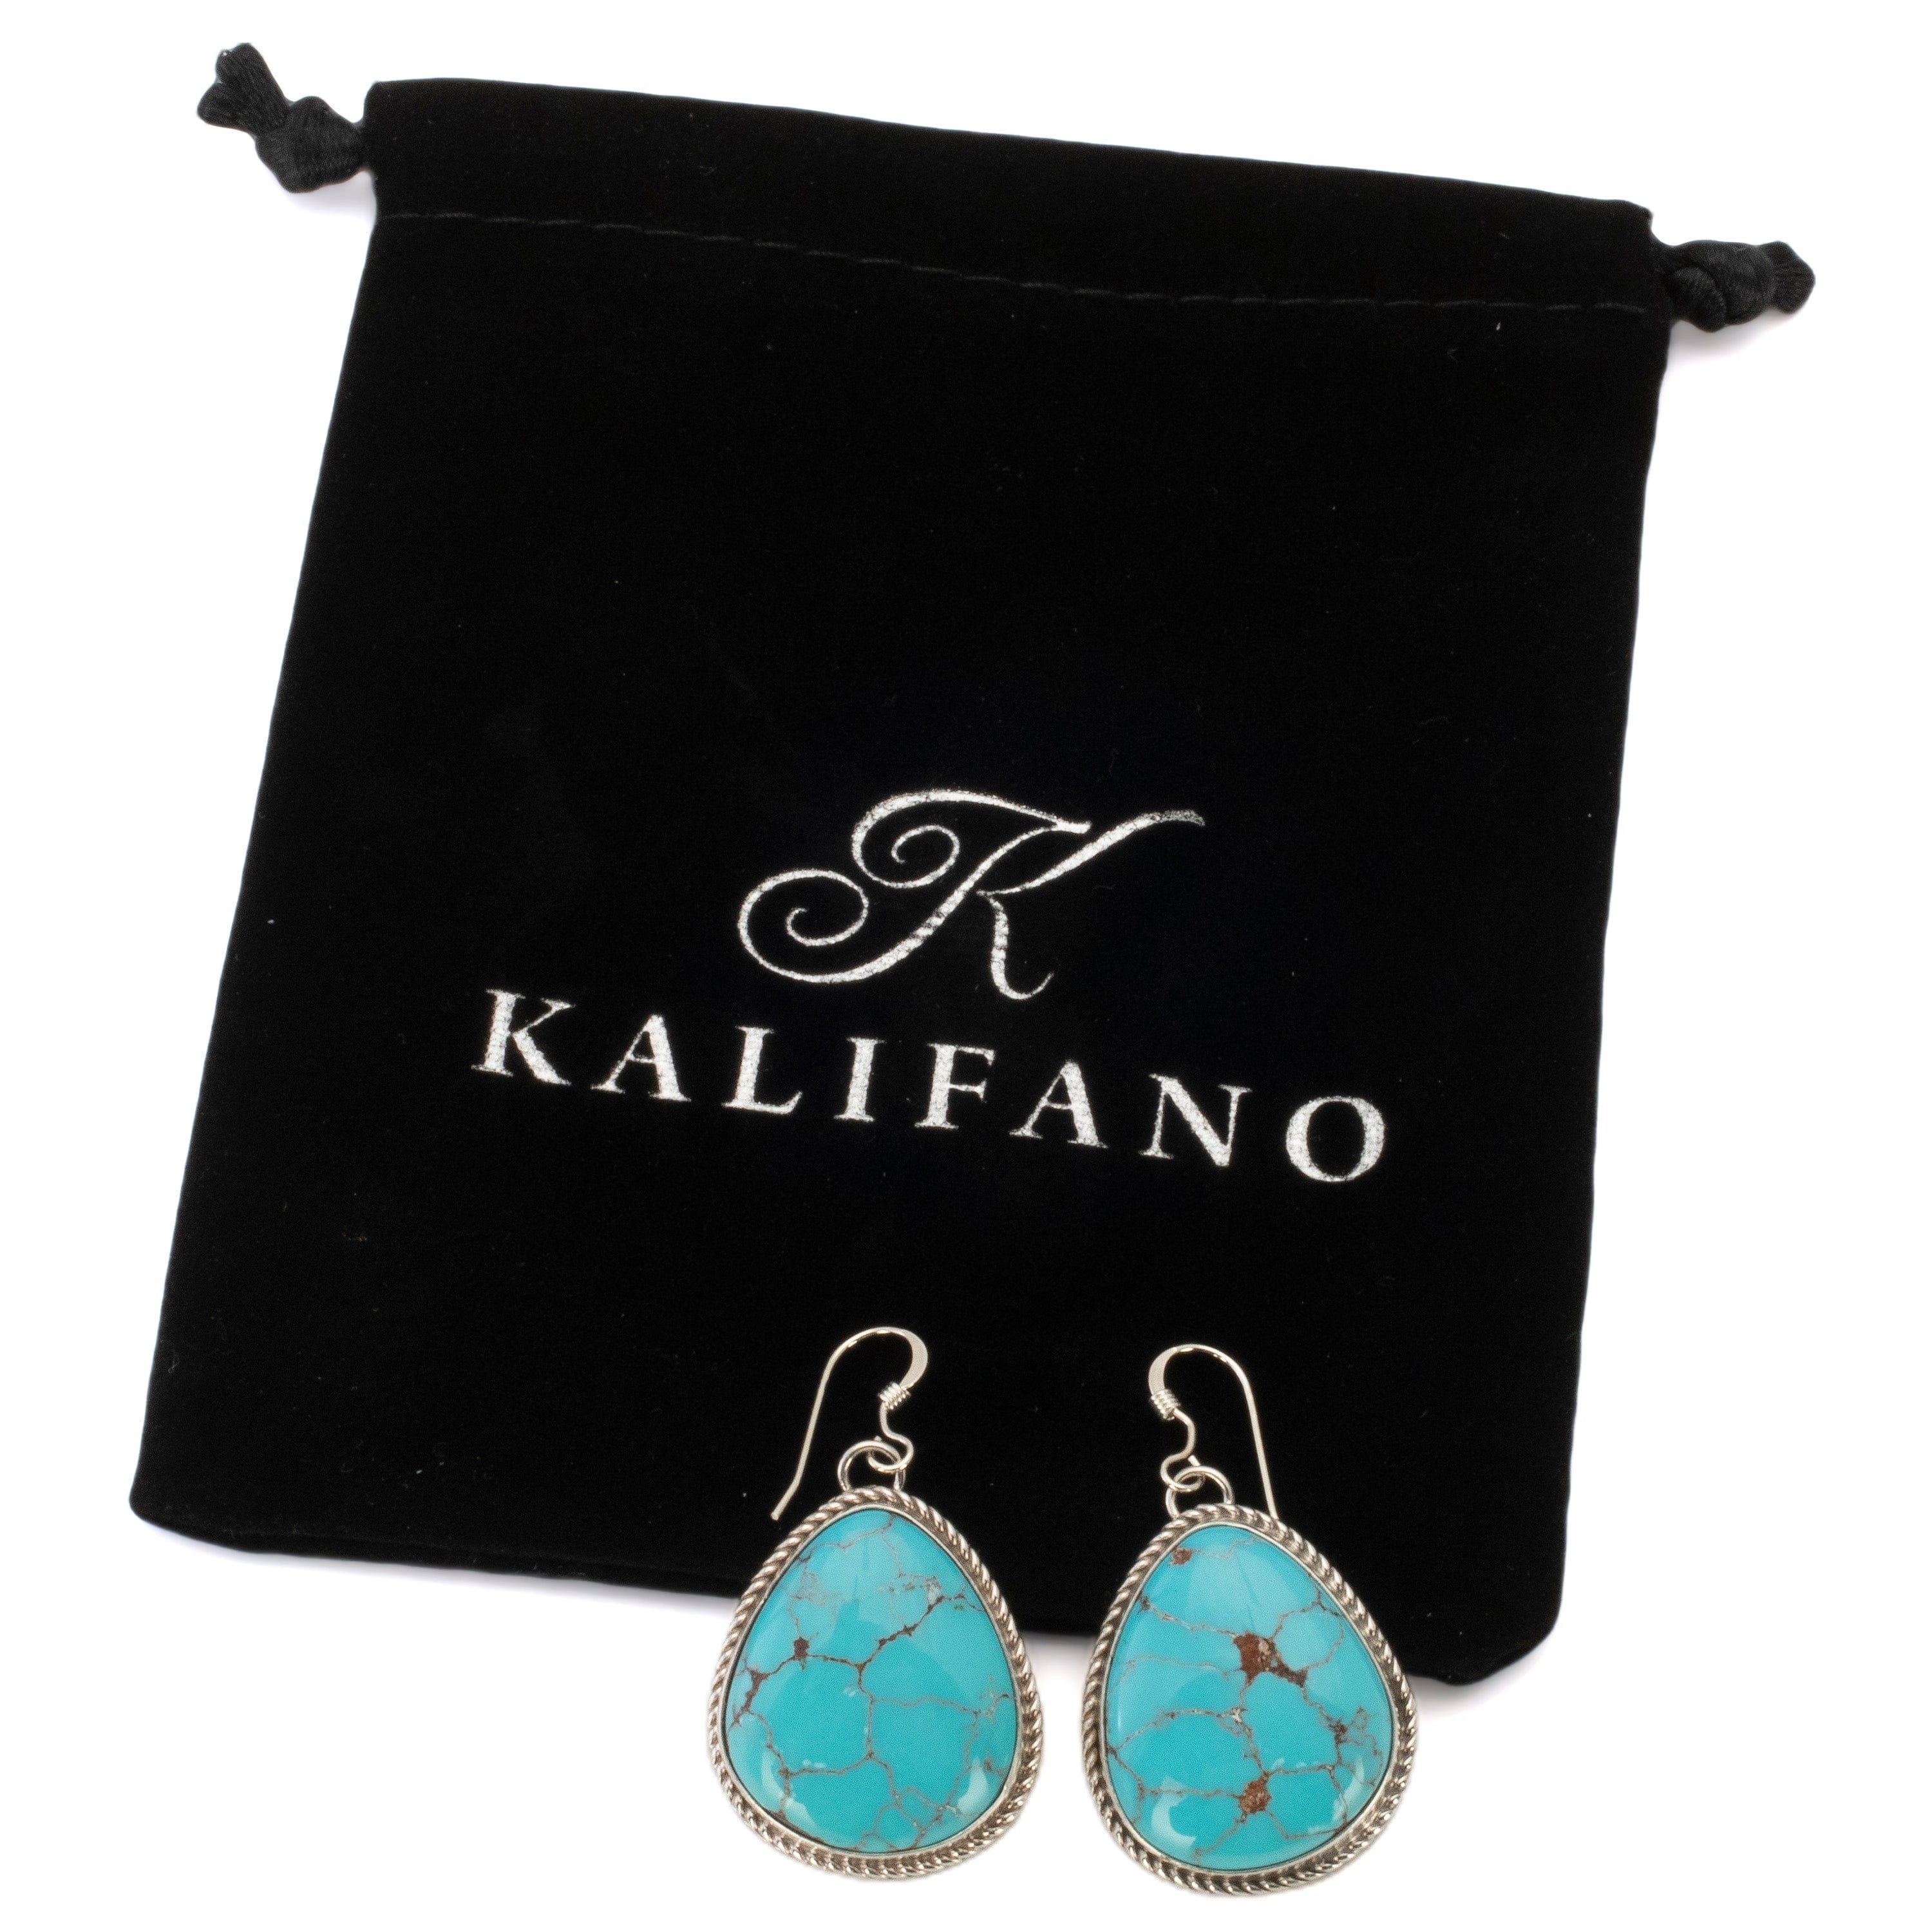 Kalifano Native American Jewelry Kingman Turquoise USA Native American Made 925 Sterling Silver Dangly Earrings with French Hook NAE600.014